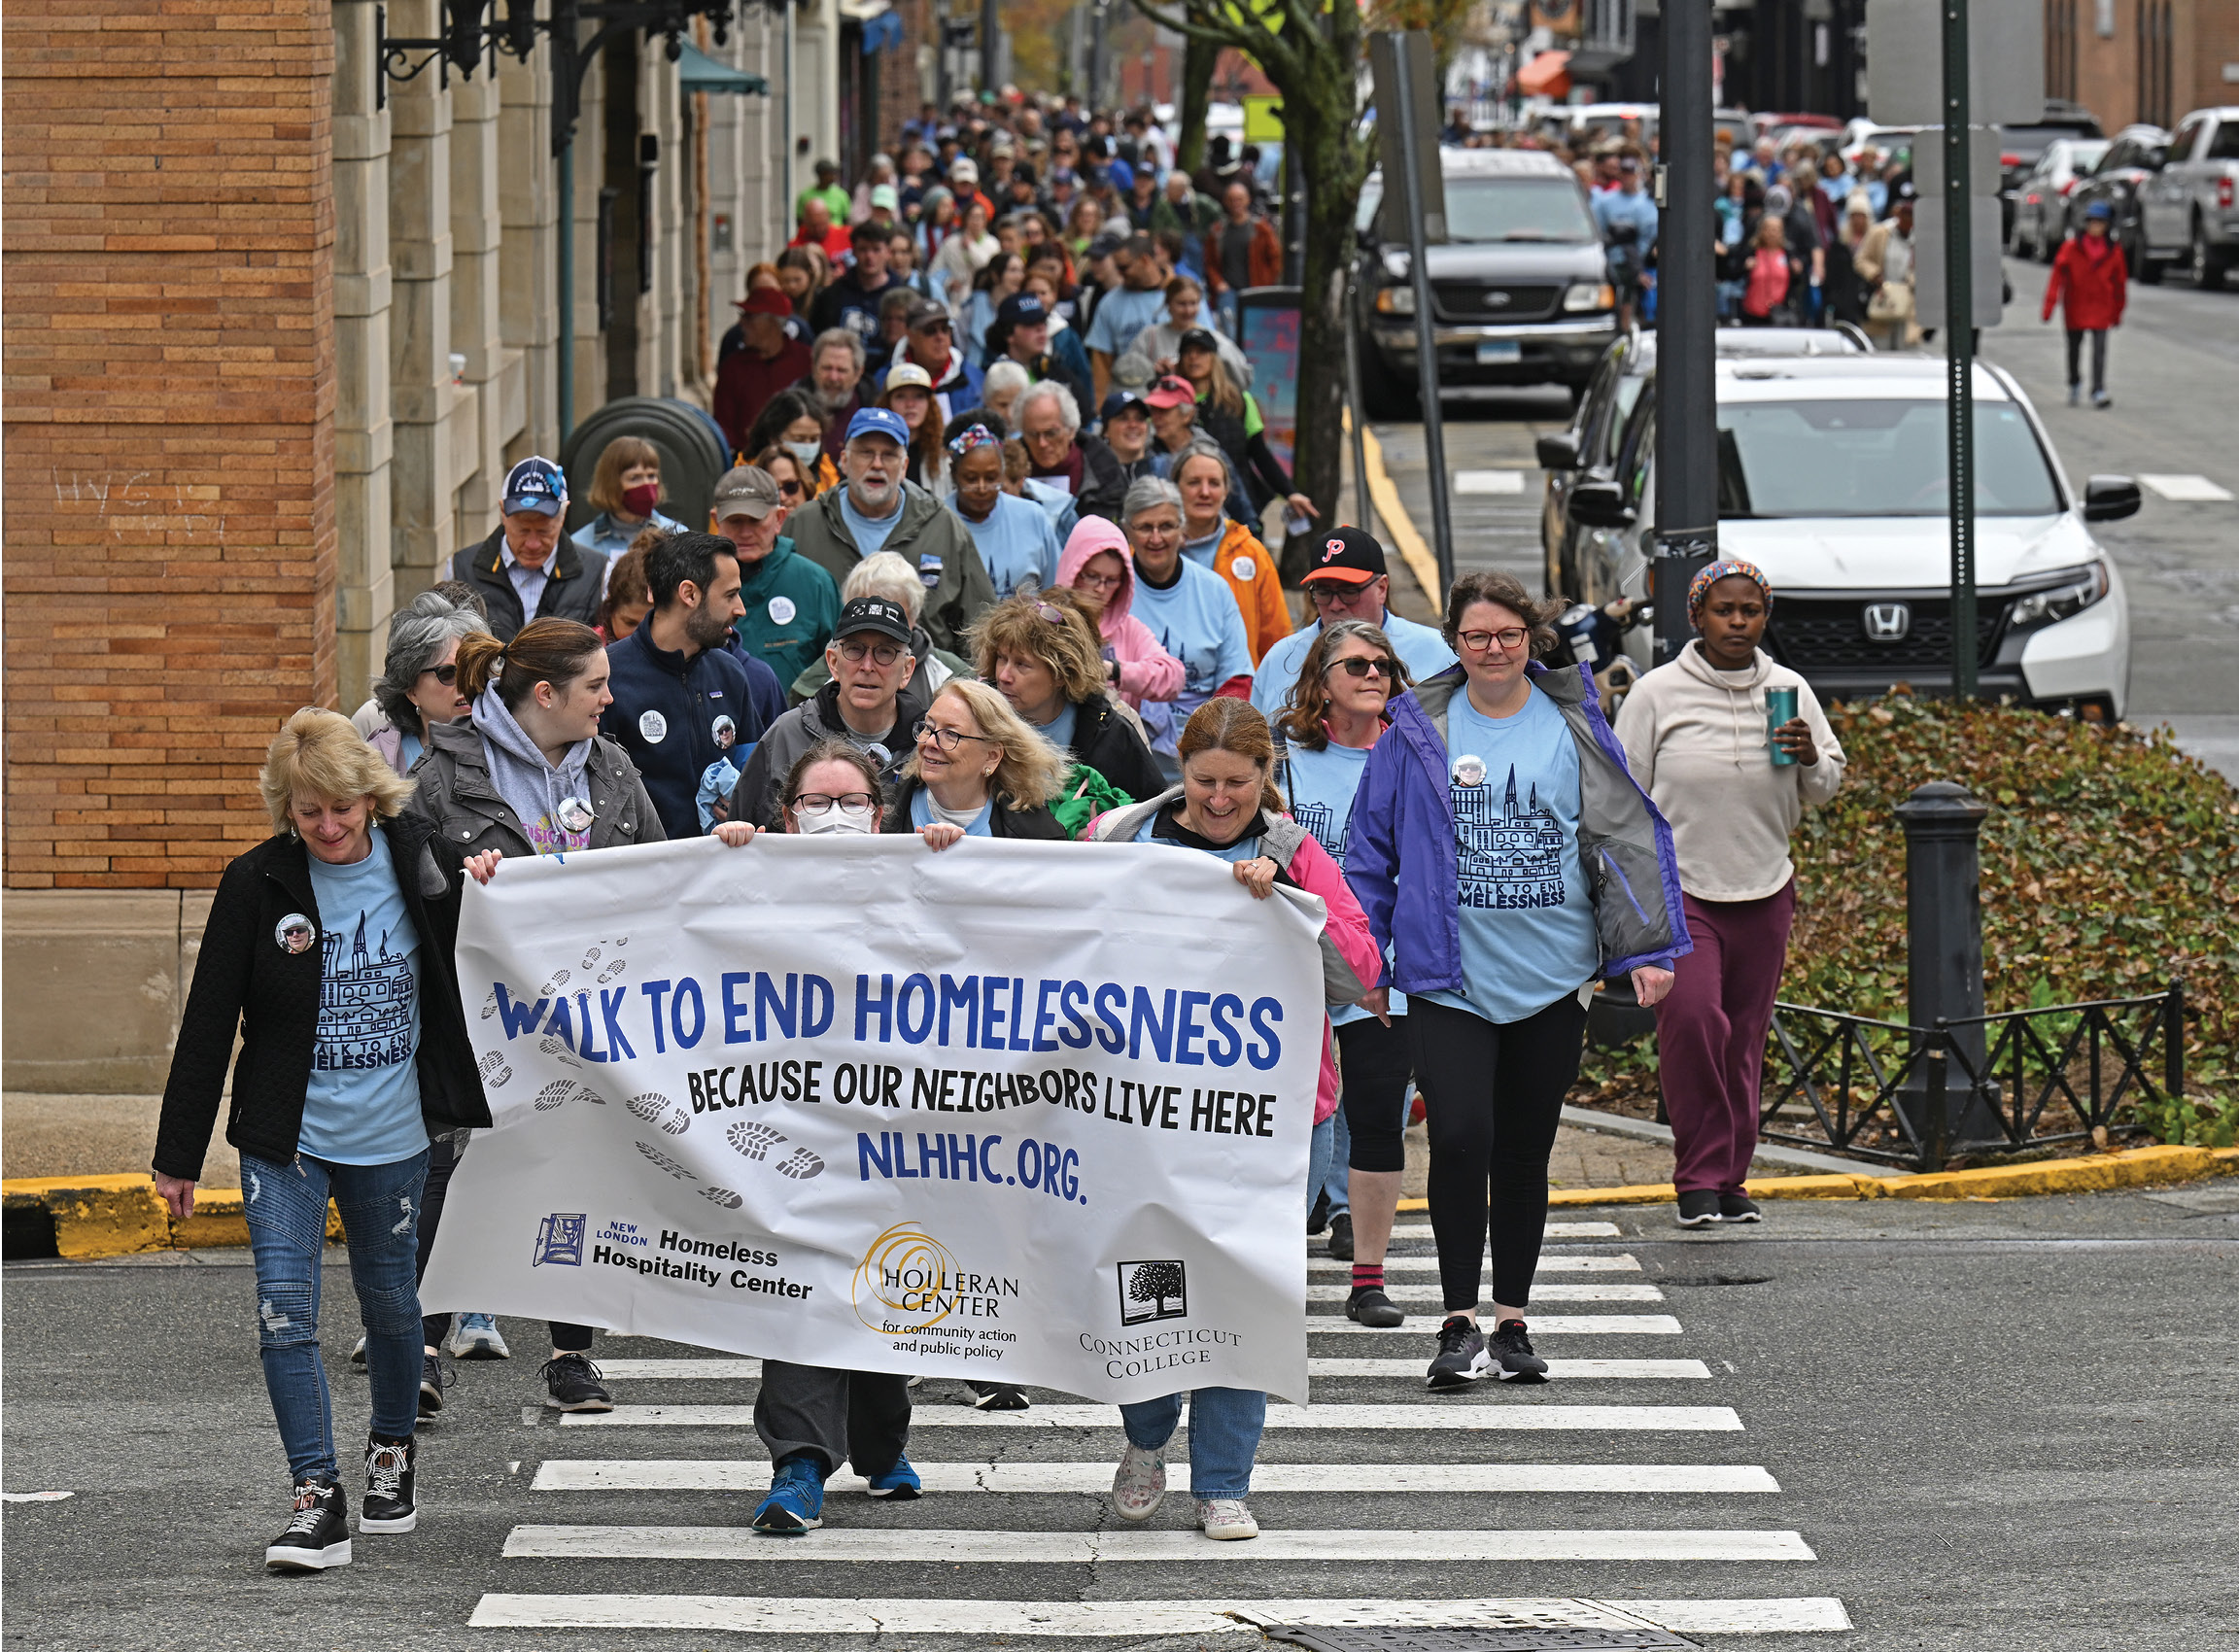 Annual Walk to End Homelessness sponsored by the New London Homeless Hospitality Center and The Holleran Center for Community Action and Public Policy.